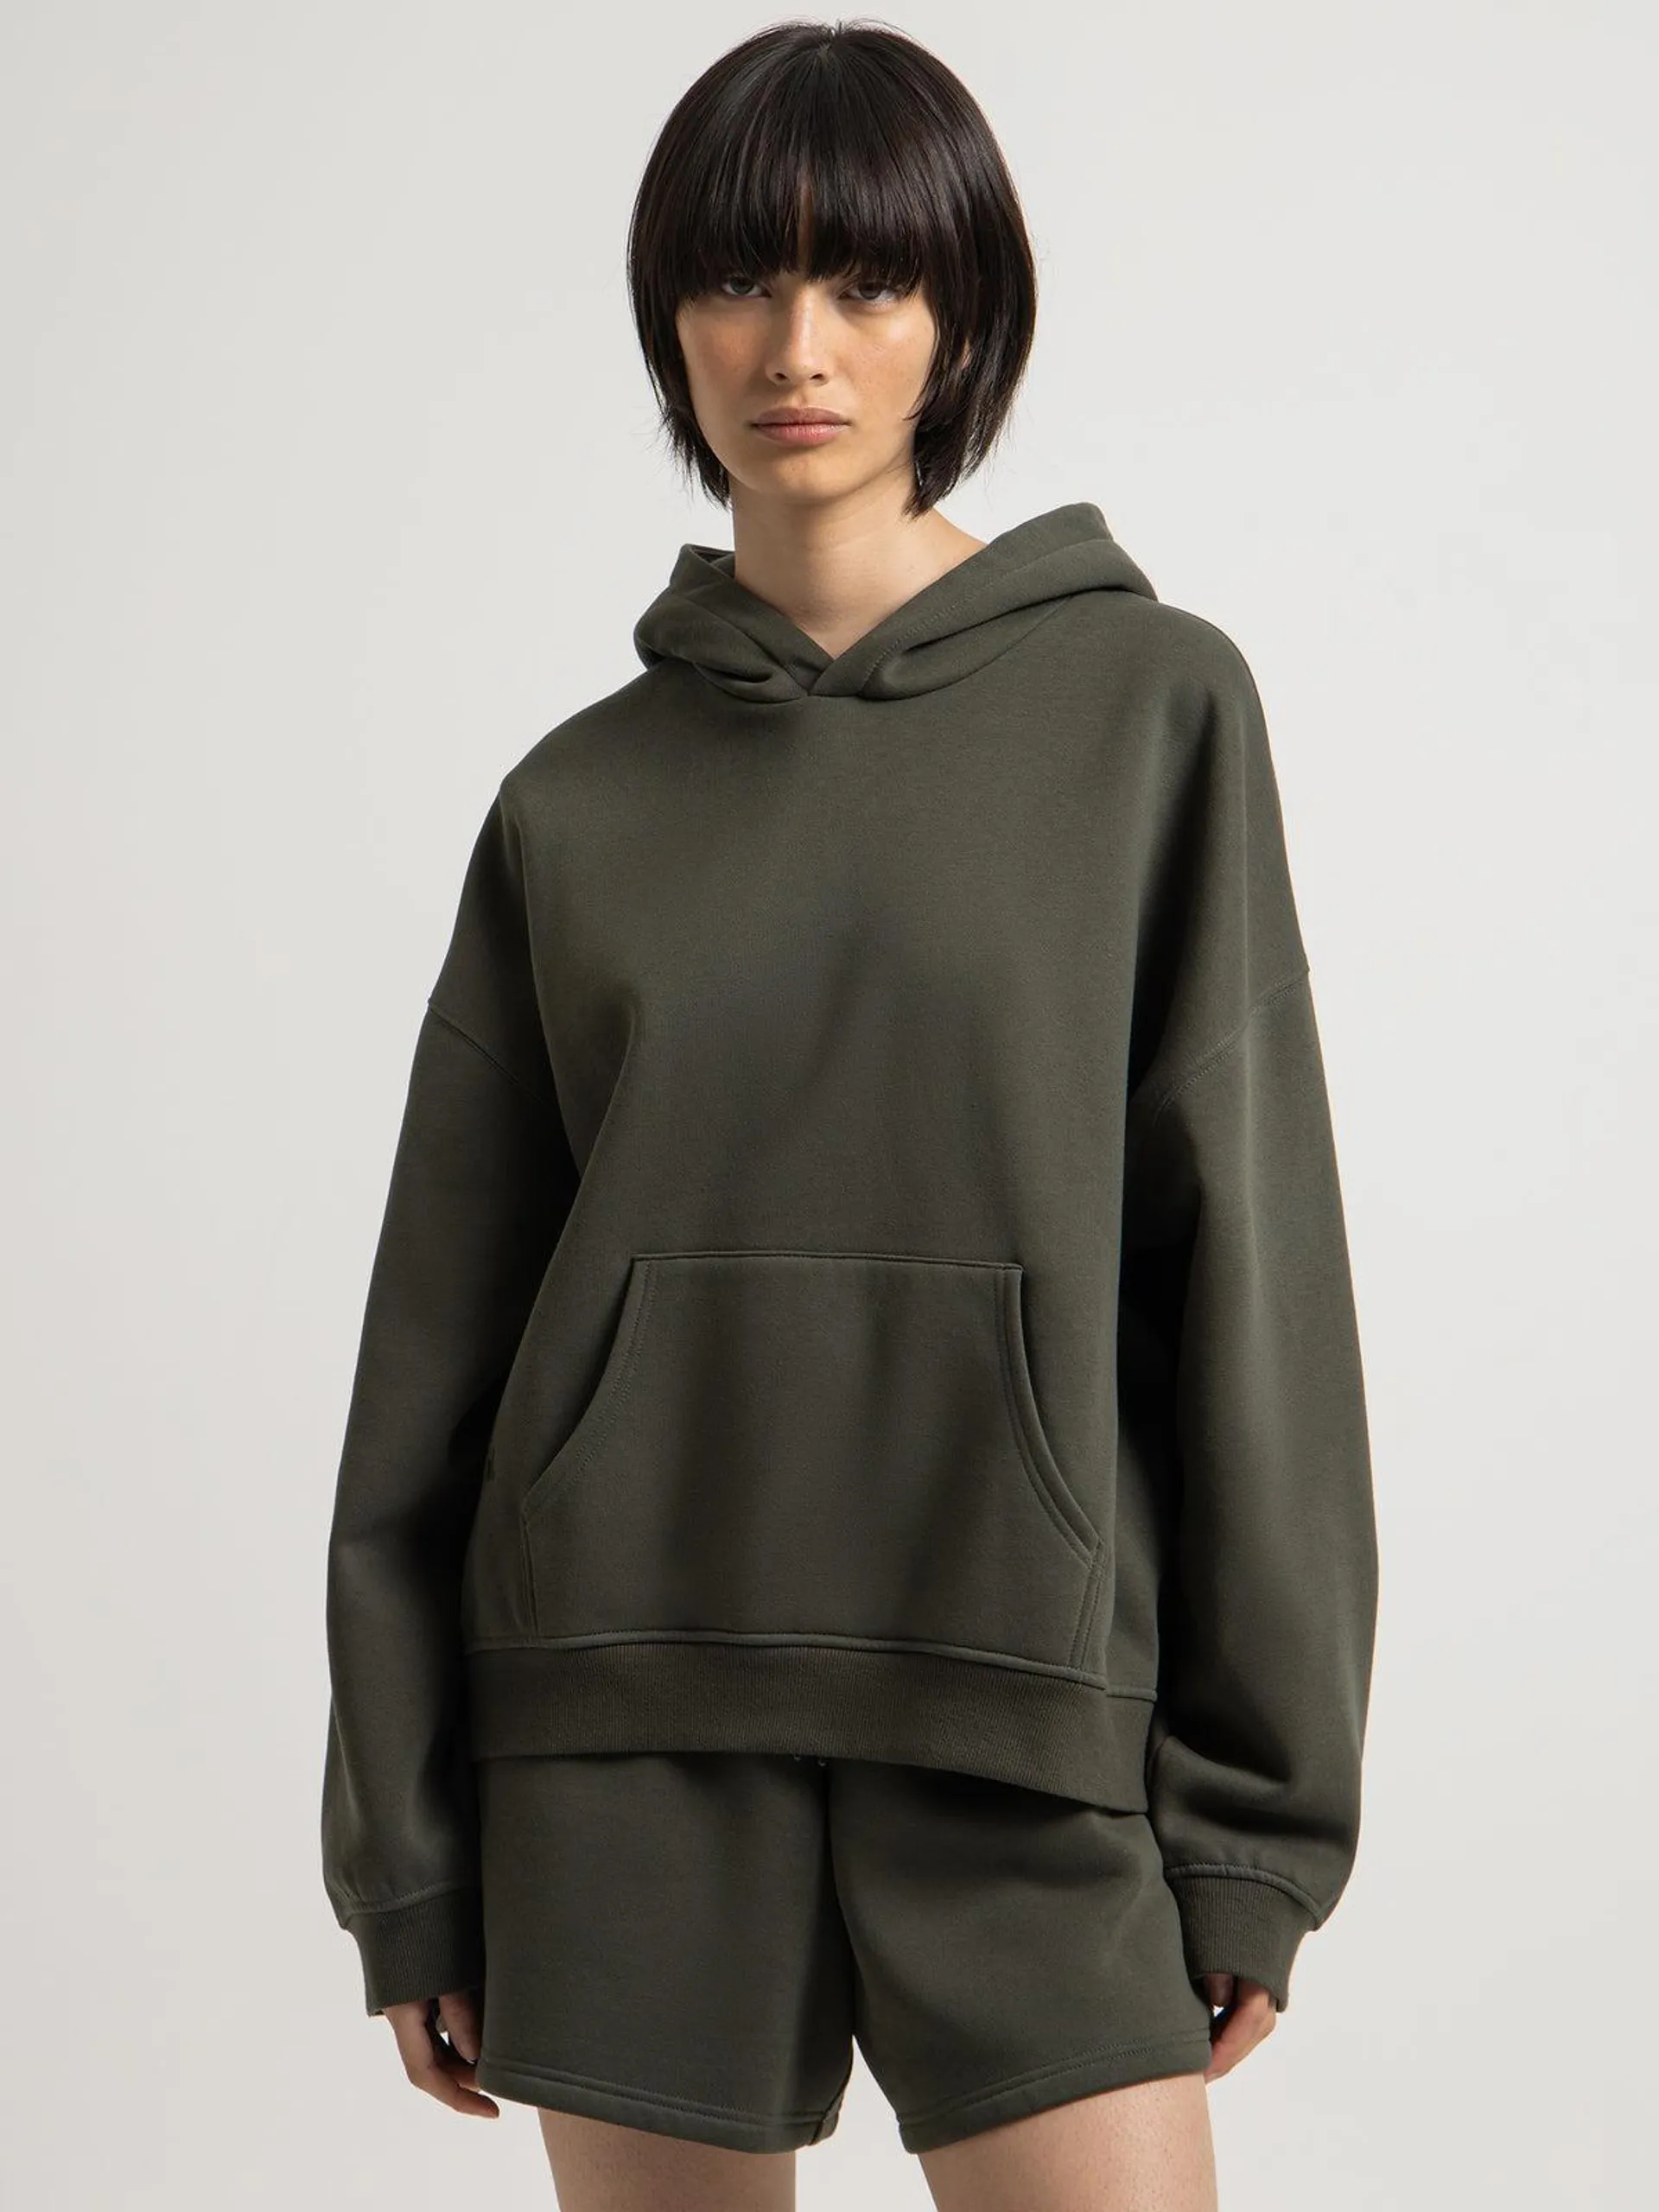 Carter Curated Hoodie in Hunter Green